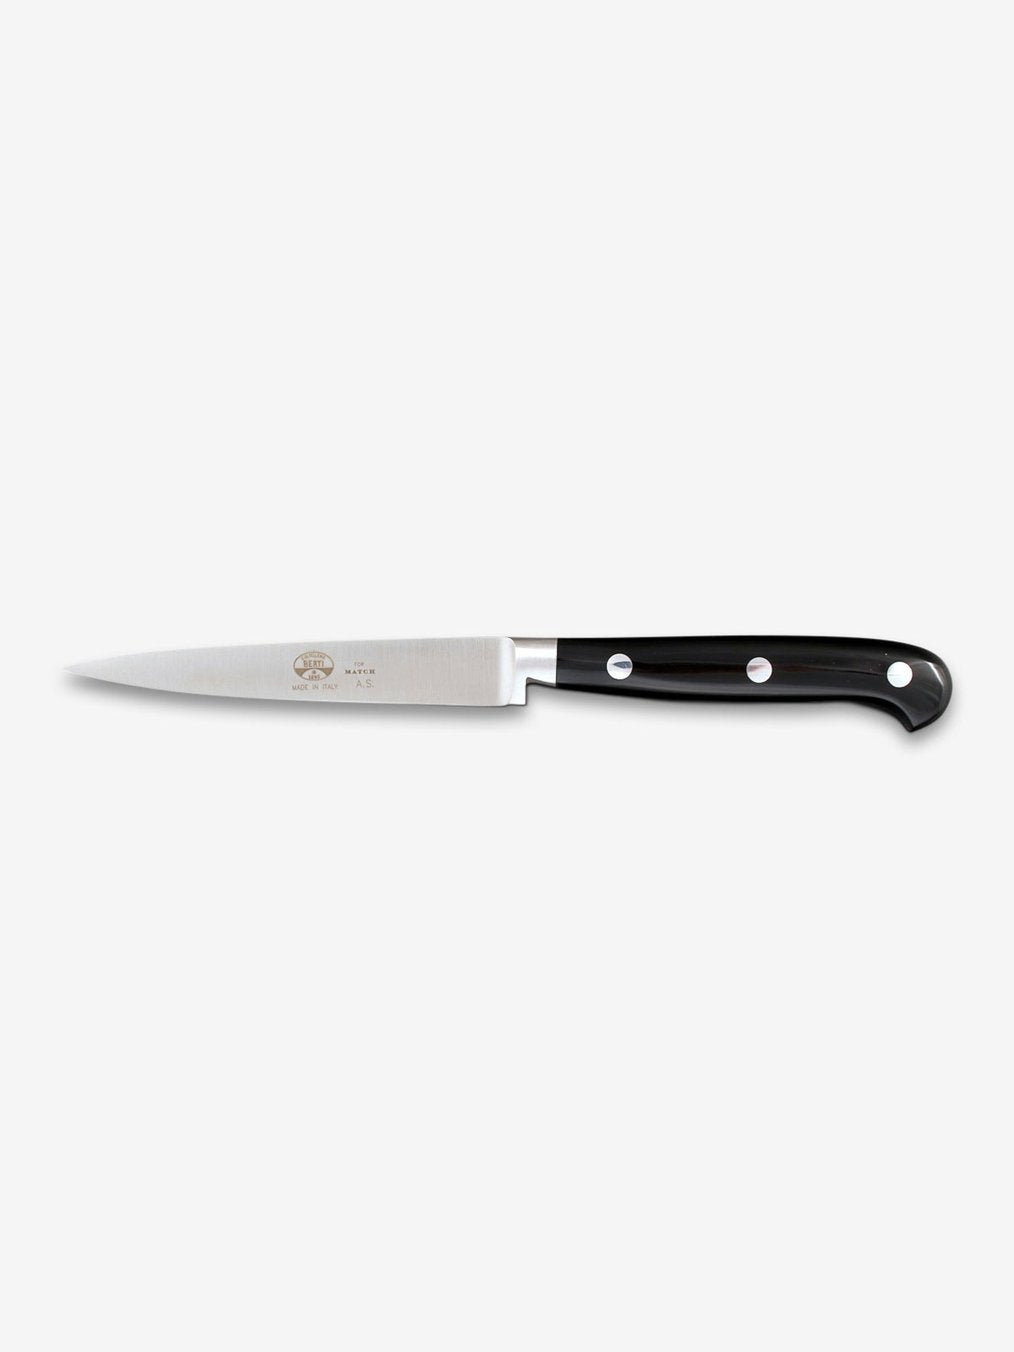 Paring knife with Black Lucite Handle